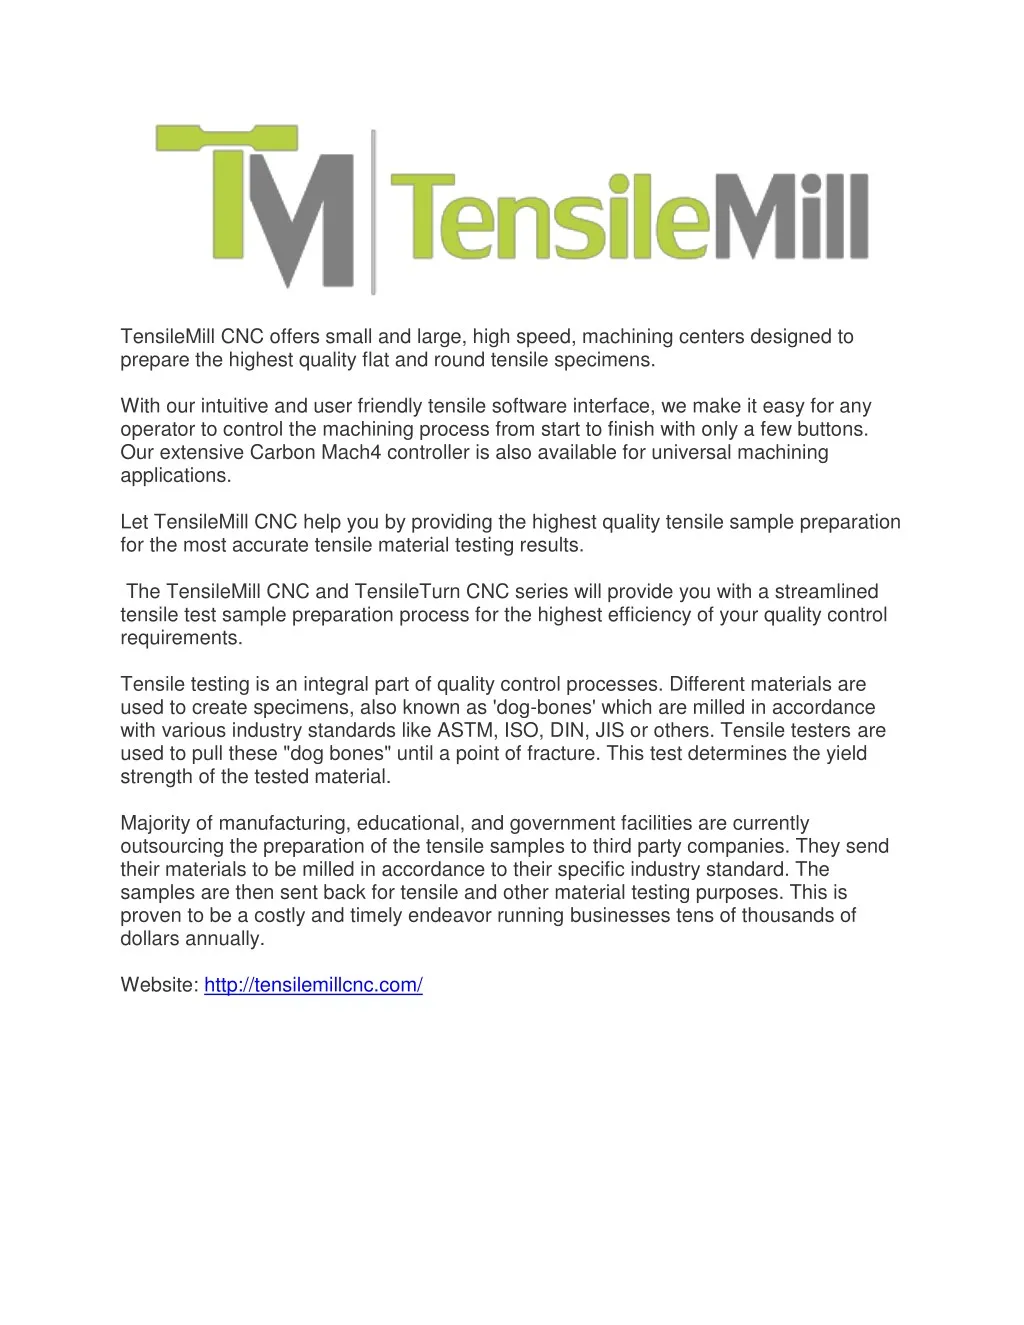 tensilemill cnc offers small and large high speed